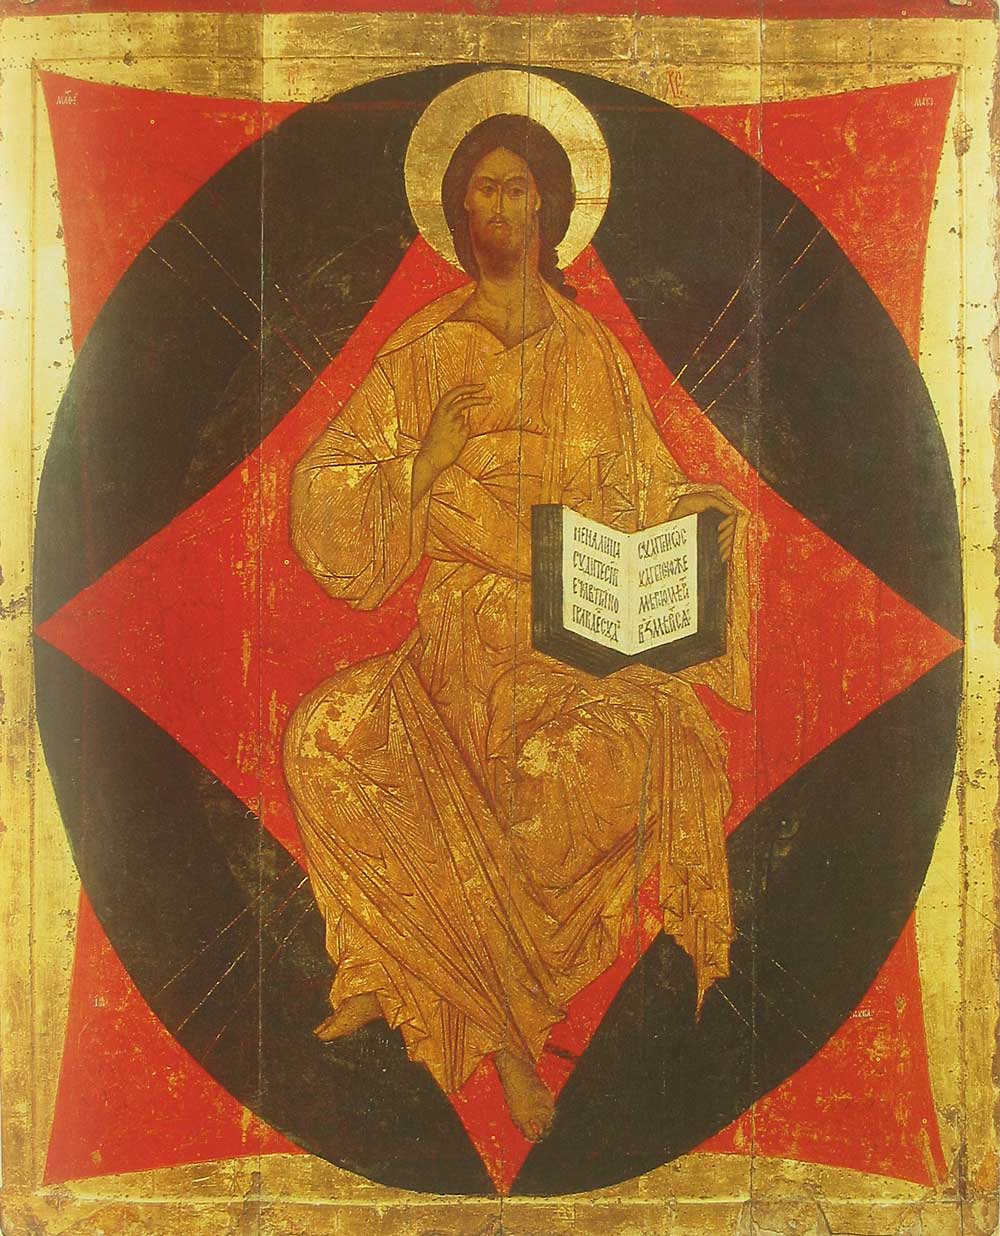 Spas v Silah. (Christ in Majesty). The icon from the Deisus Chin (Row) of Spas-Transfiguration Cathedral of the Spas-Transfiguration Monastery in Yaroslavl. First half or middle of the XVI century. Yaroslavl, Museum of History and Architecture